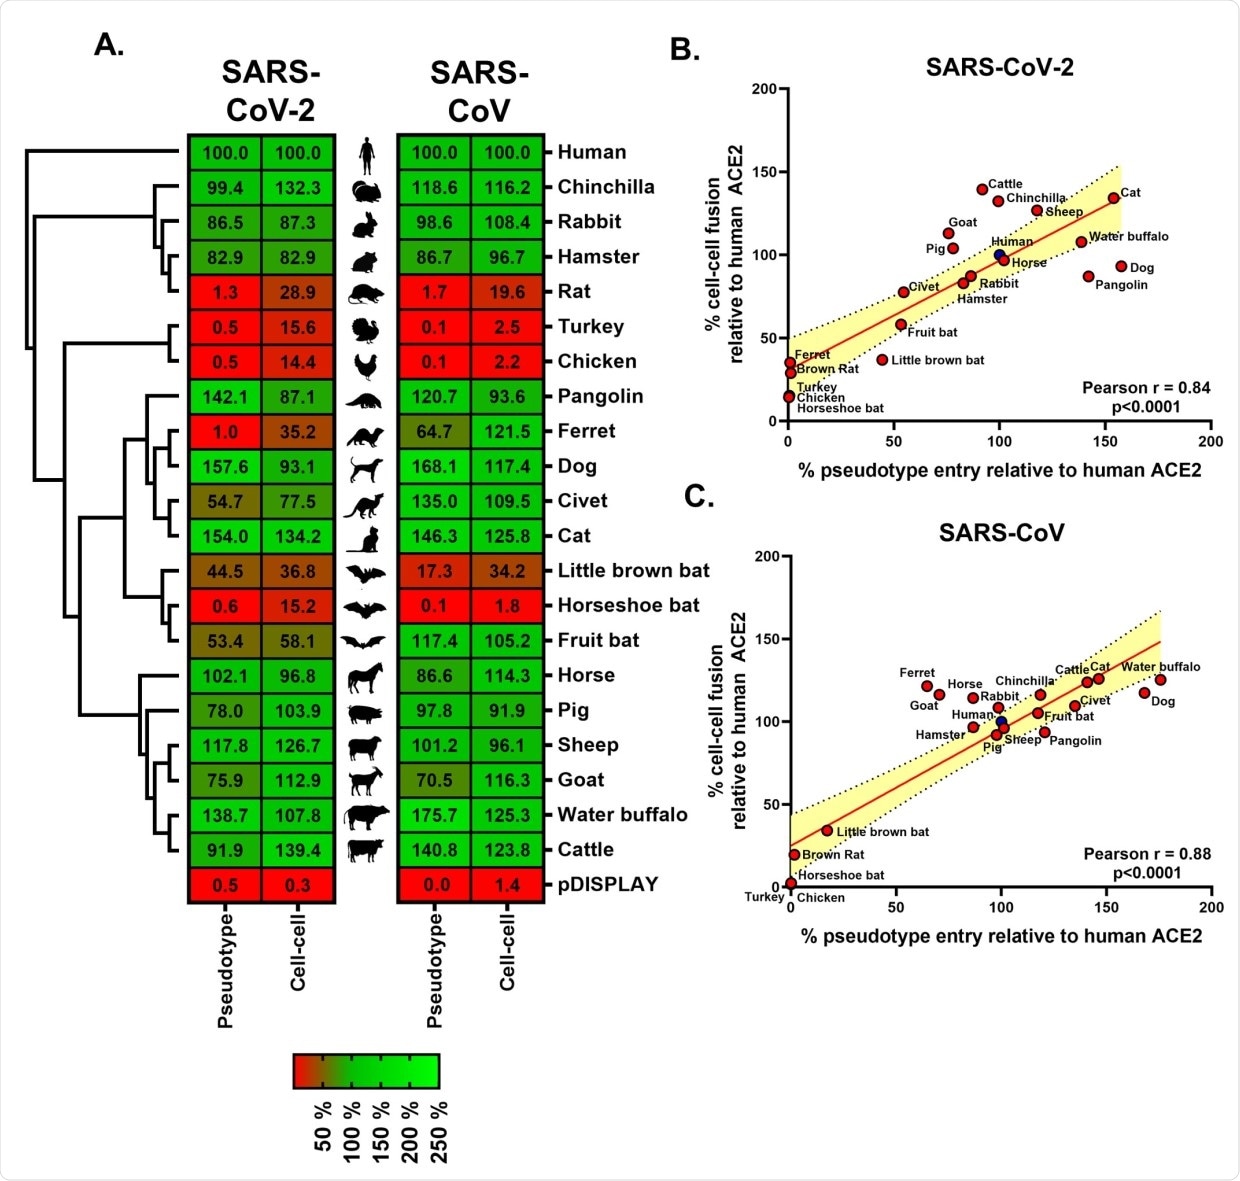 Receptor screening using surrogate entry assays identifies SARS-CoV-2 Spike as a pan-tropic viral attachment protein. (A) A heatmap illustrating the receptor usage profile of SARS-CoV-2 and SARS-CoV in pseudotype entry and cell–cell fusion assays with various mammalian and bird ACE2s. The data in each row are normalised to the signal seen for human ACE2 (top), with results representing the mean percentage calculated from 3 separate experiments performed on different days. A vector-only control (pDISPLAY) was added to demonstrate specificity. Mammalian and bird ACE2s are organised, top to bottom, based on their phylogenetic relationship (rectangular cladogram, left). The inter-experimental standard error of the mean for the pseudotype and cell–cell fusion assays ranged from 0.01% to 47.92% (median 10.73%) and 0.12% to 32.97% (median 5.43%), respectively. (B and C) For both SARS-CoV-2 and SARS-CoV, the respective cell–cell and pseudotype assay percentages for each ACE2 protein (relative to human ACE2) were plotted on an XY scatter graph, the Pearson correlation calculated and a linear line of regression fitted together with 95% confidence intervals. The data underlying this figure may be found in S1 Data. ACE2, angiotensin-converting enzyme 2; SARS-CoV, SARS Coronavirus; SARS-CoV-2, SARS Coronavirus 2.